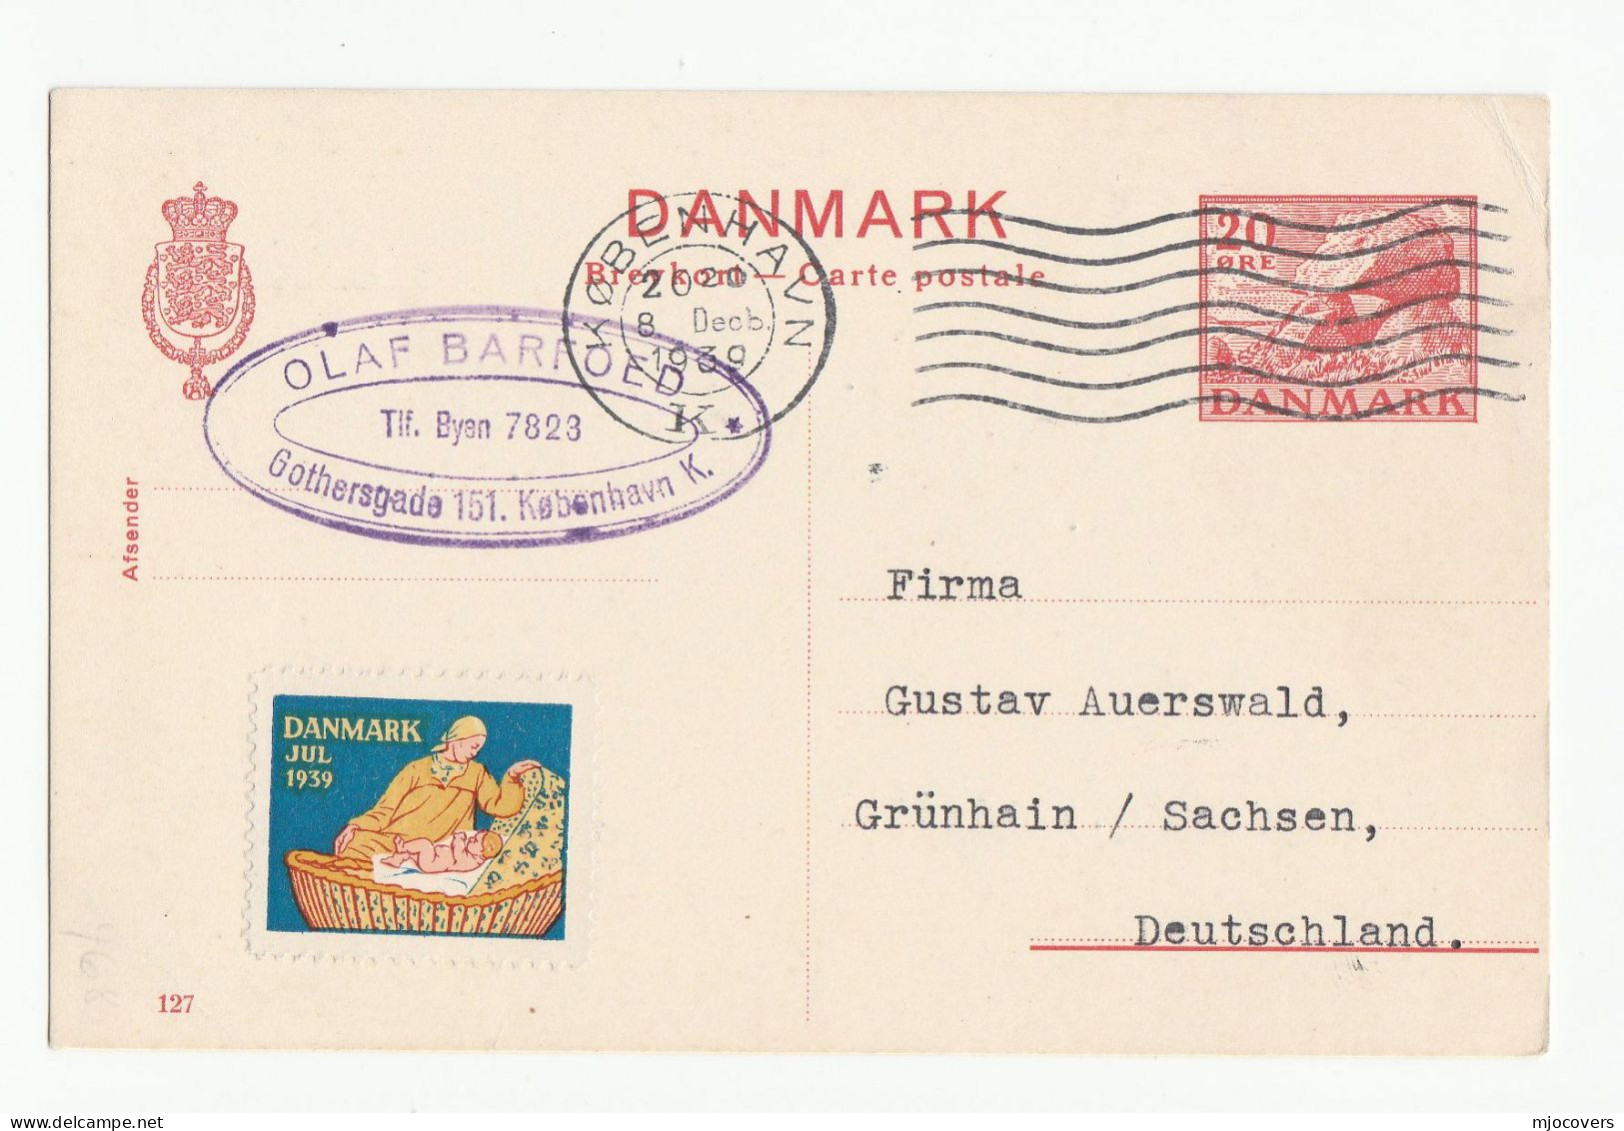 1939 DENMARK To Grunhain Germany With CHRISTMAS Label Women Baby POSTAL STATIONERY CARD Cover Stamps - Postwaardestukken